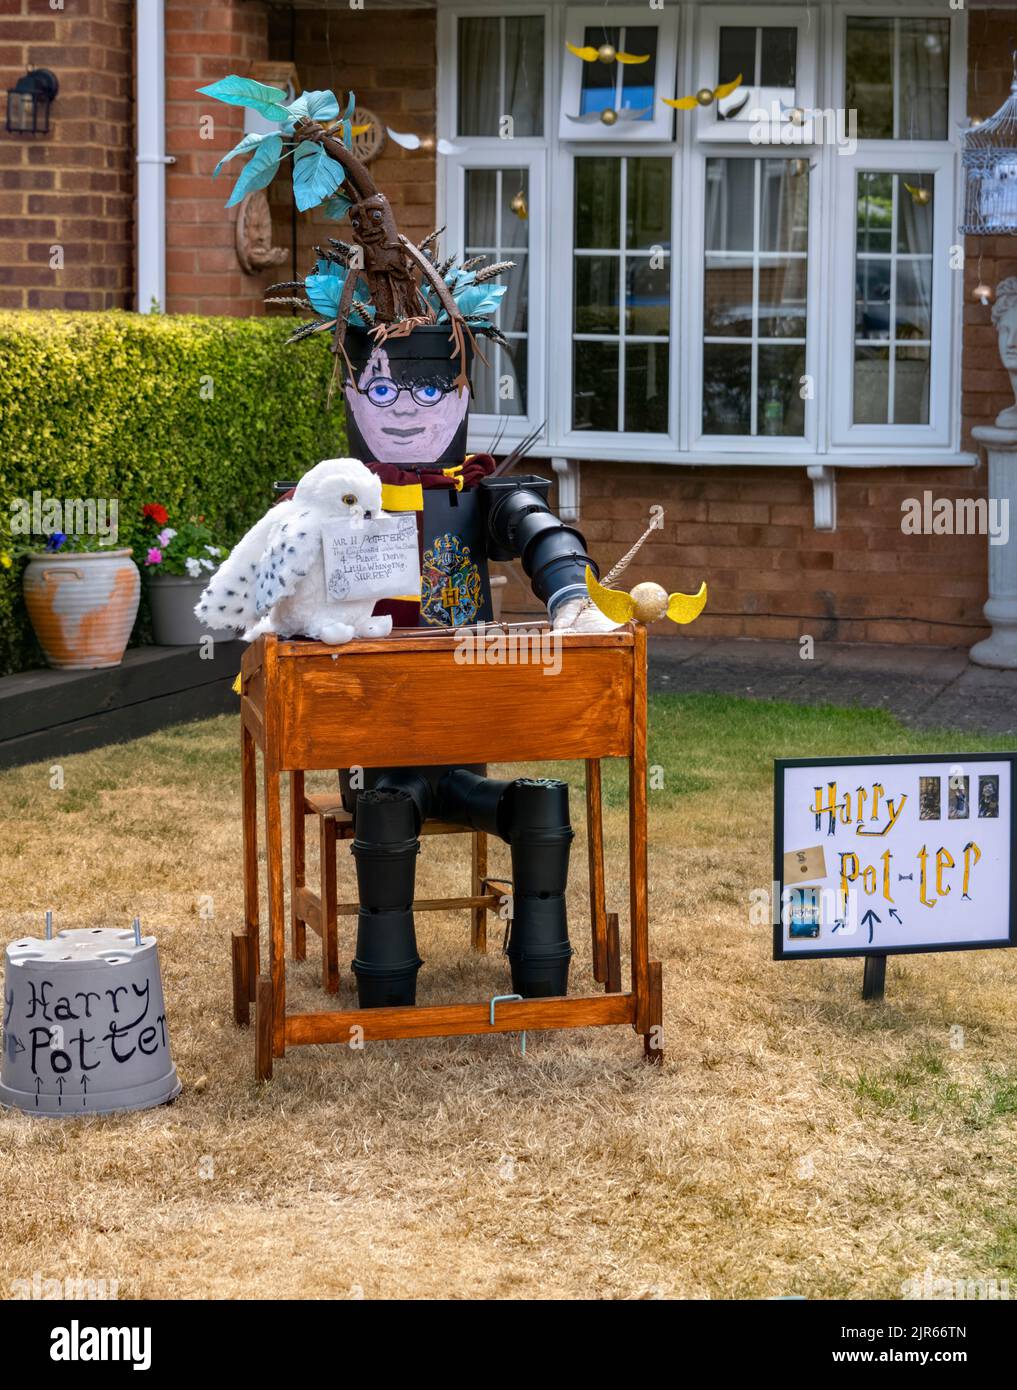 Flamstead Scarecrow Festival 2022 - Harry Potter Scarecrow, Flamstead Hertfordshire Stock Photo